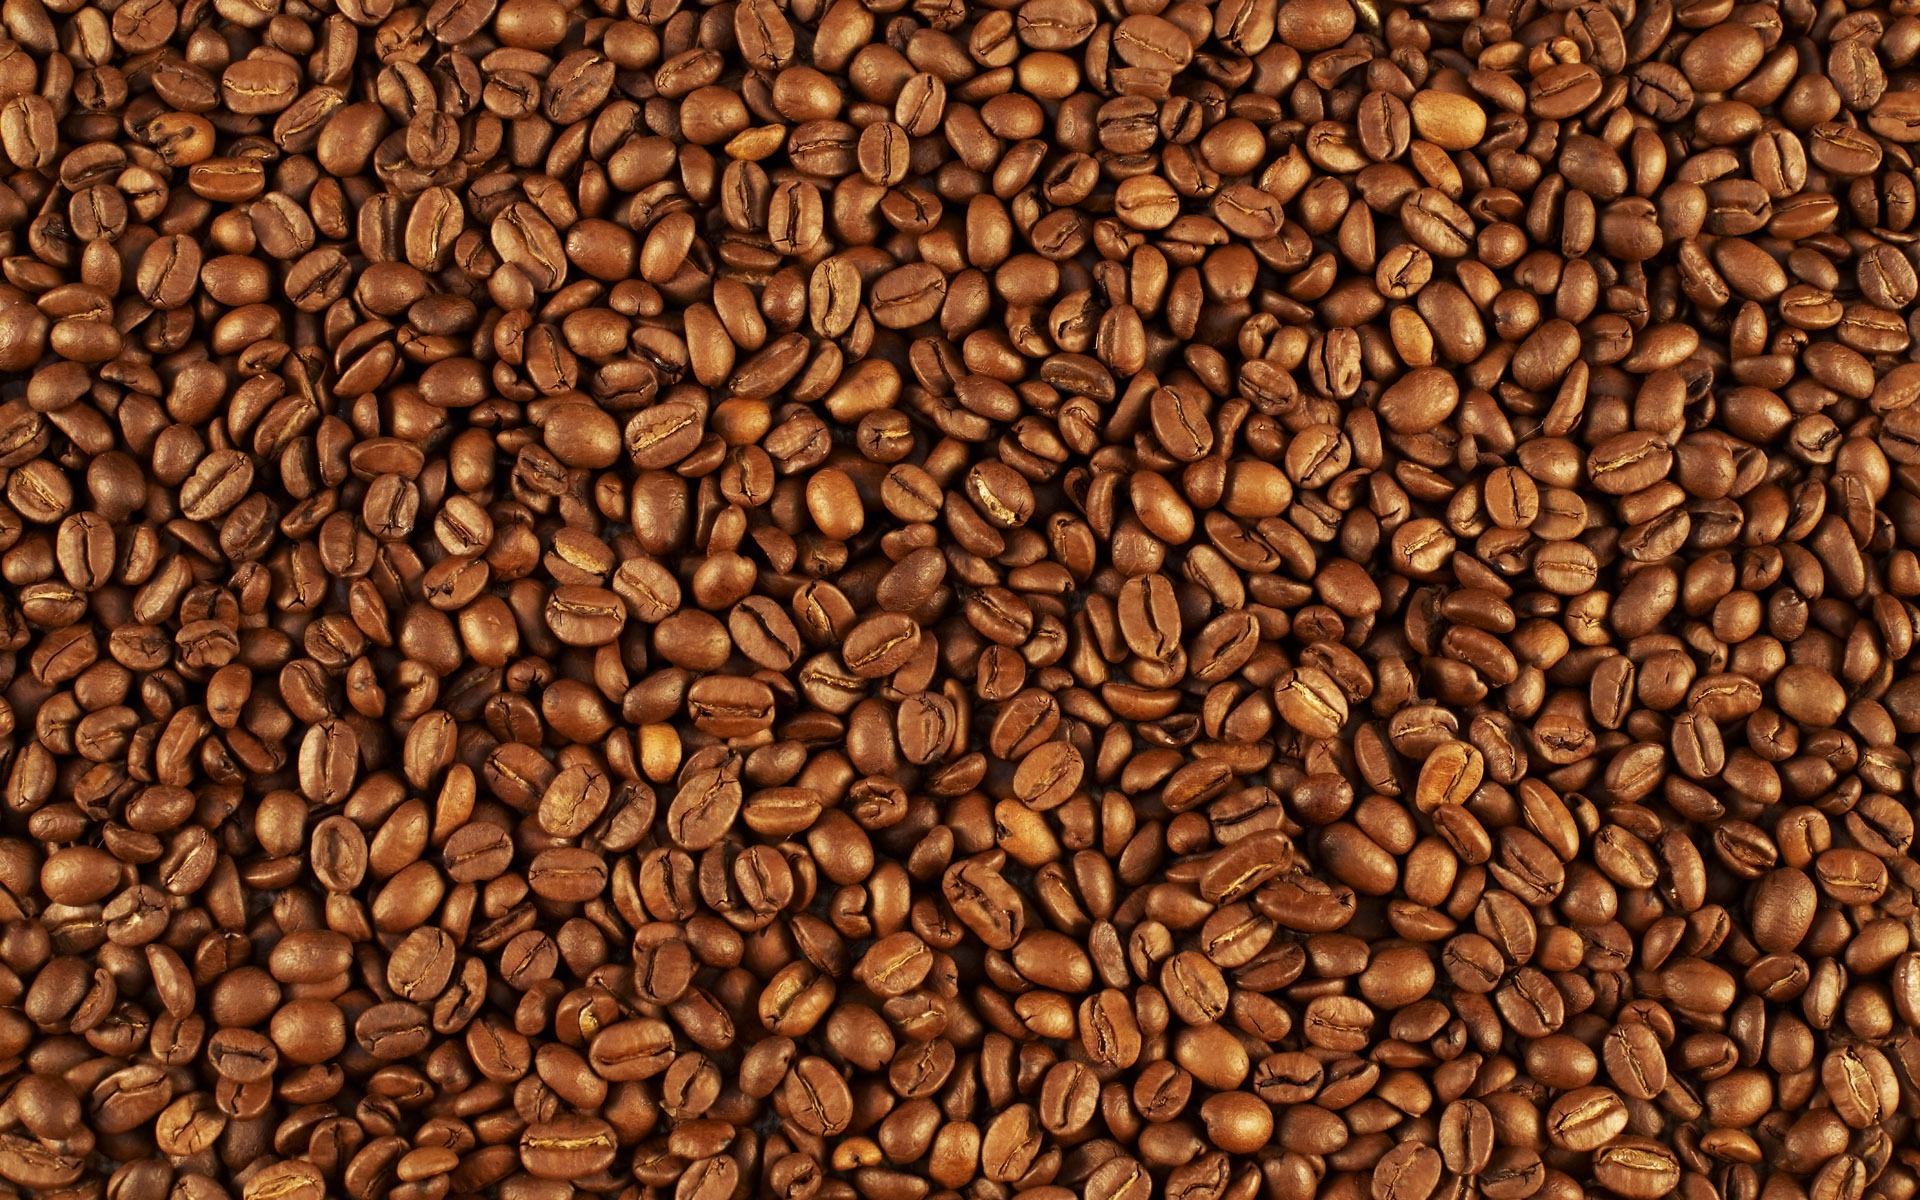 Coffee feature wallpaper (7) #16 - 1920x1200